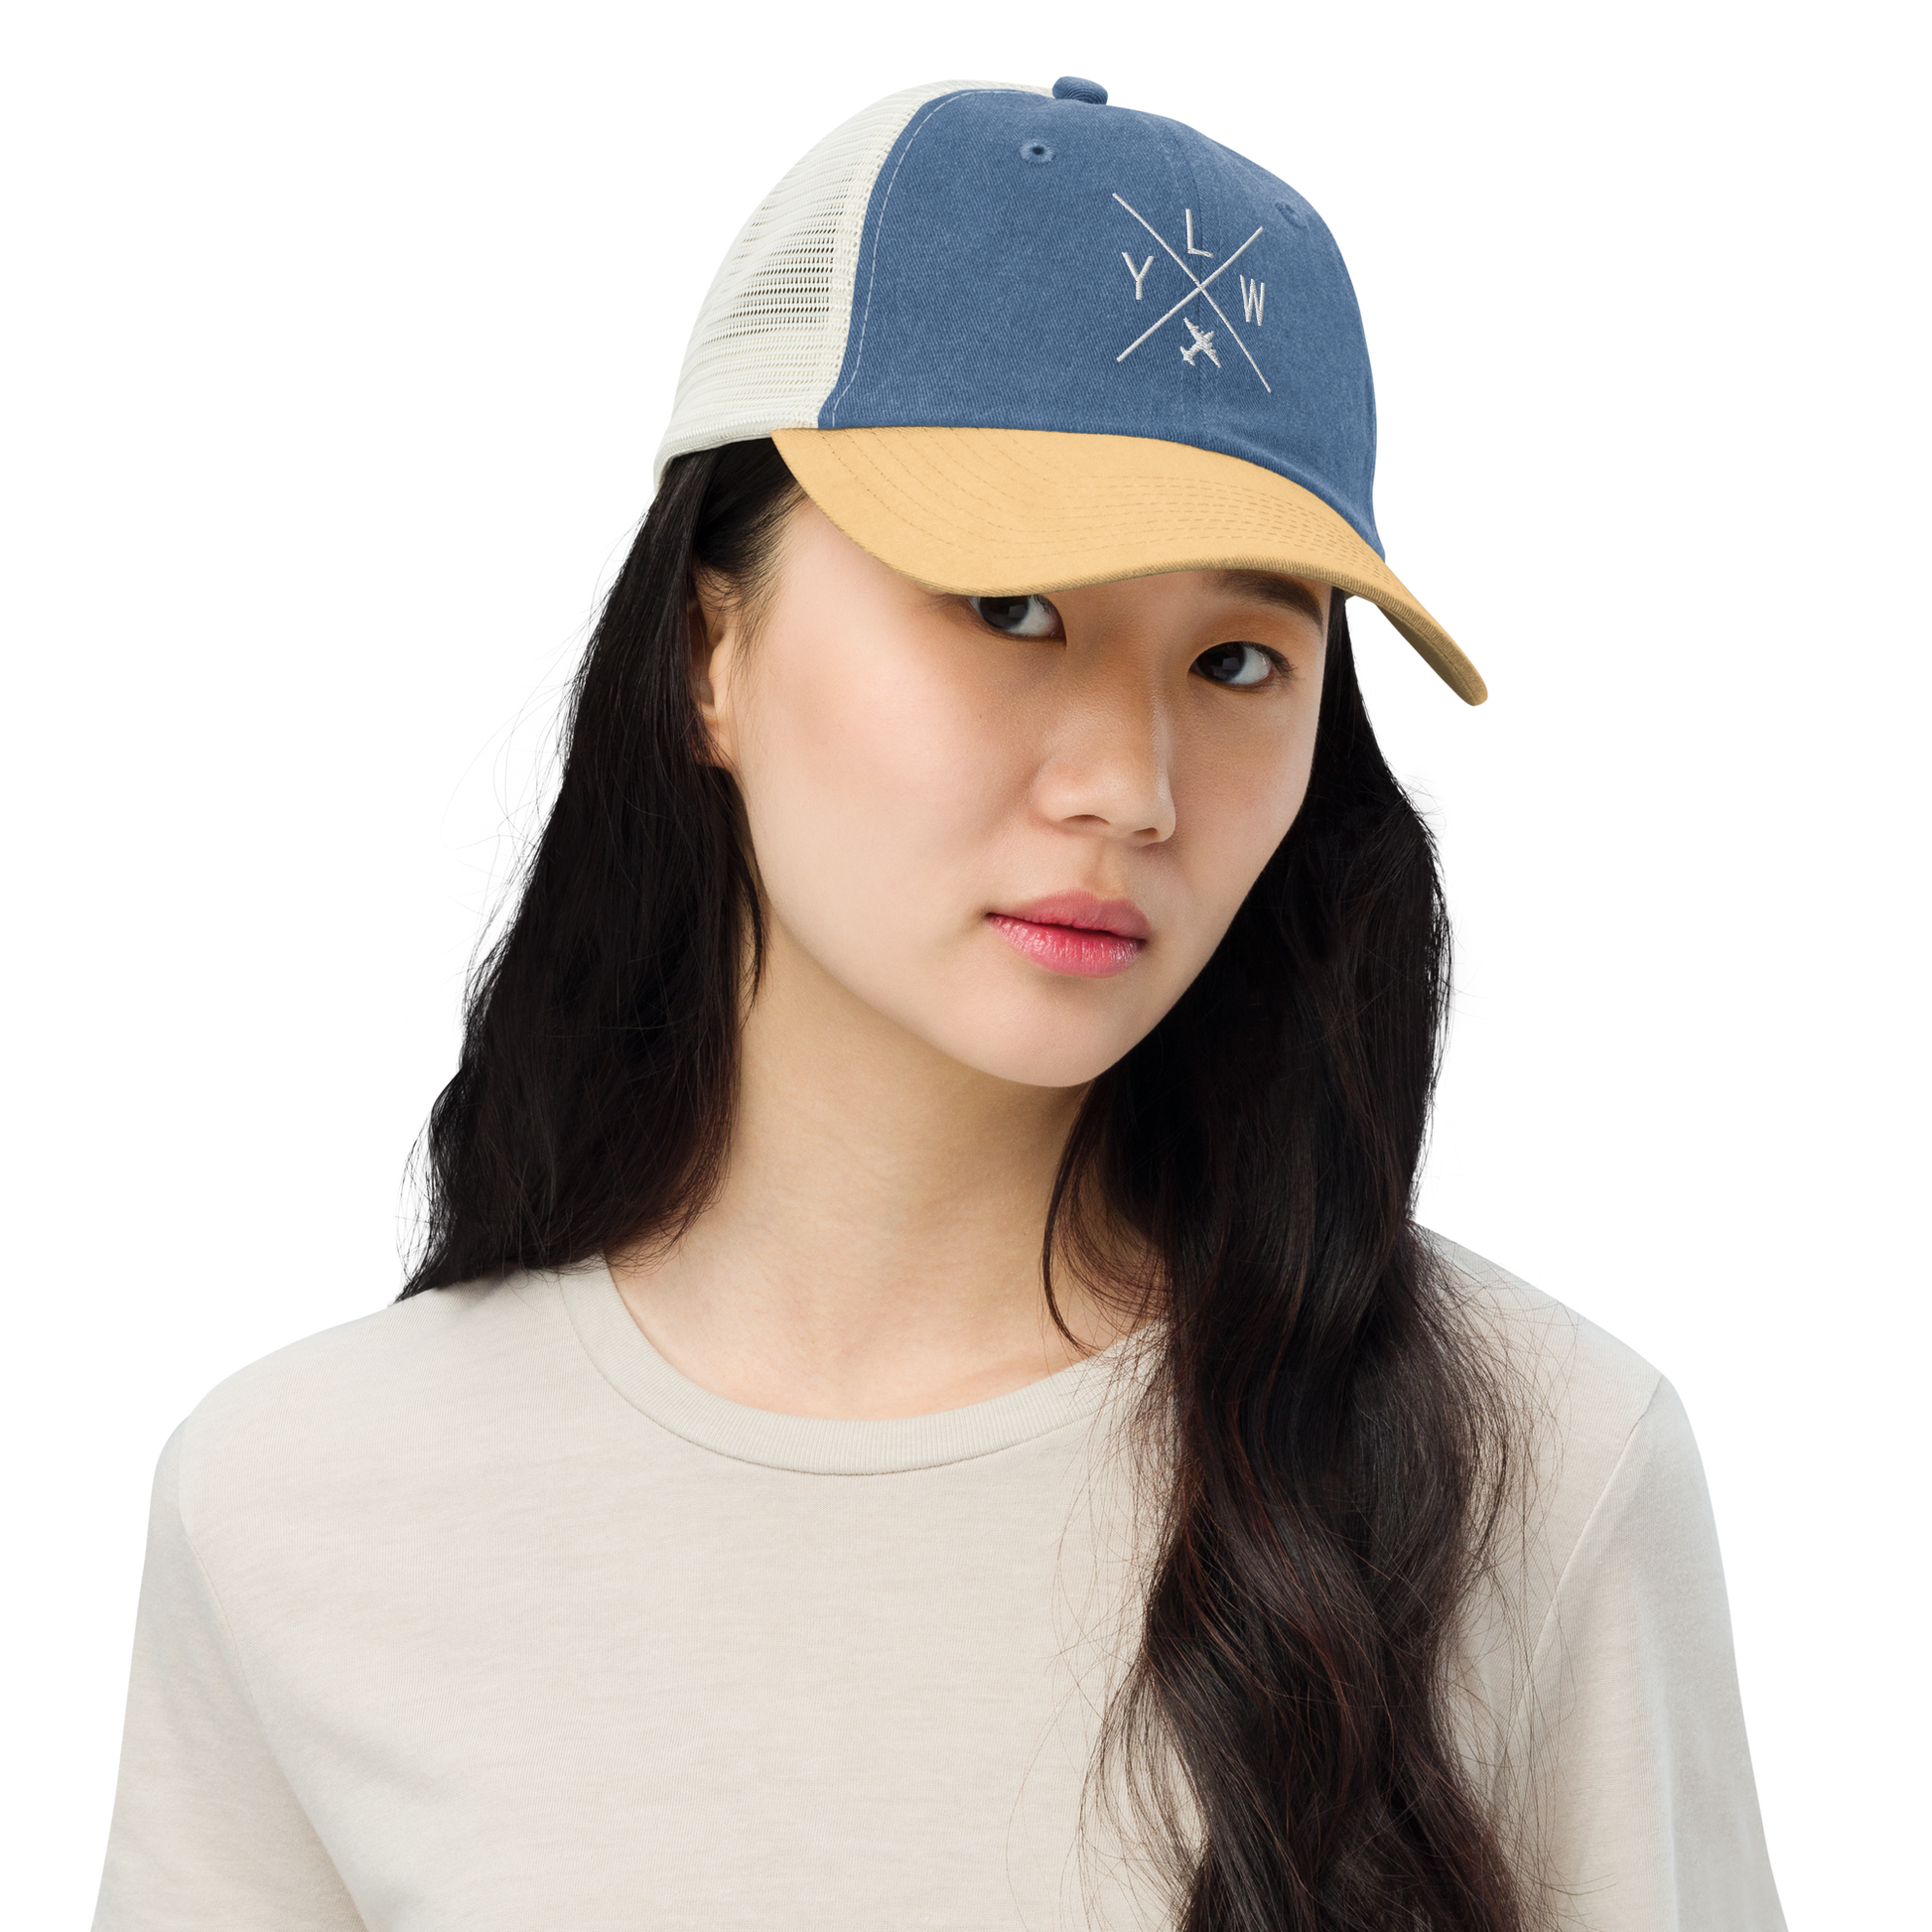 YHM Designs - YLW Kelowna Pigment-Dyed Trucker Cap - Crossed-X Design with Airport Code and Vintage Propliner - White Embroidery - Image 03